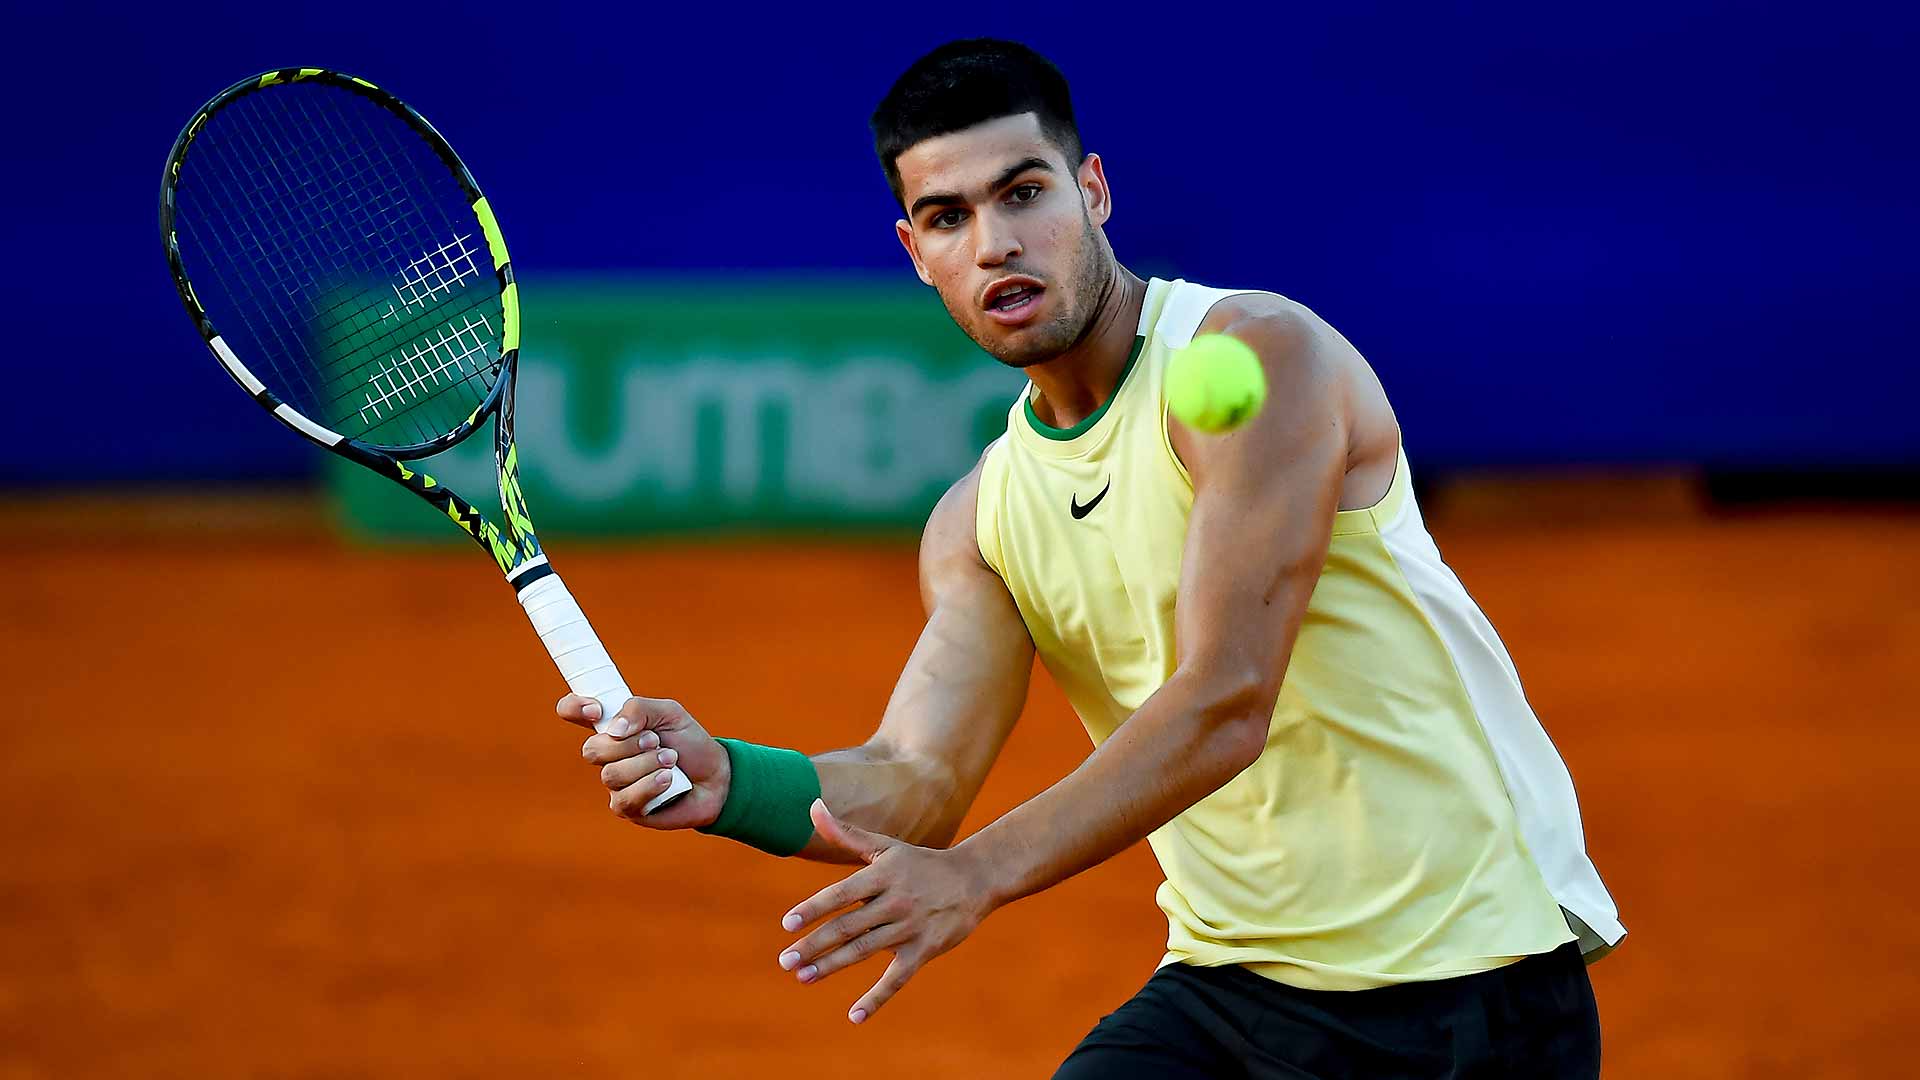 Carlos Alcaraz makes winning clay return to start Buenos Aires title